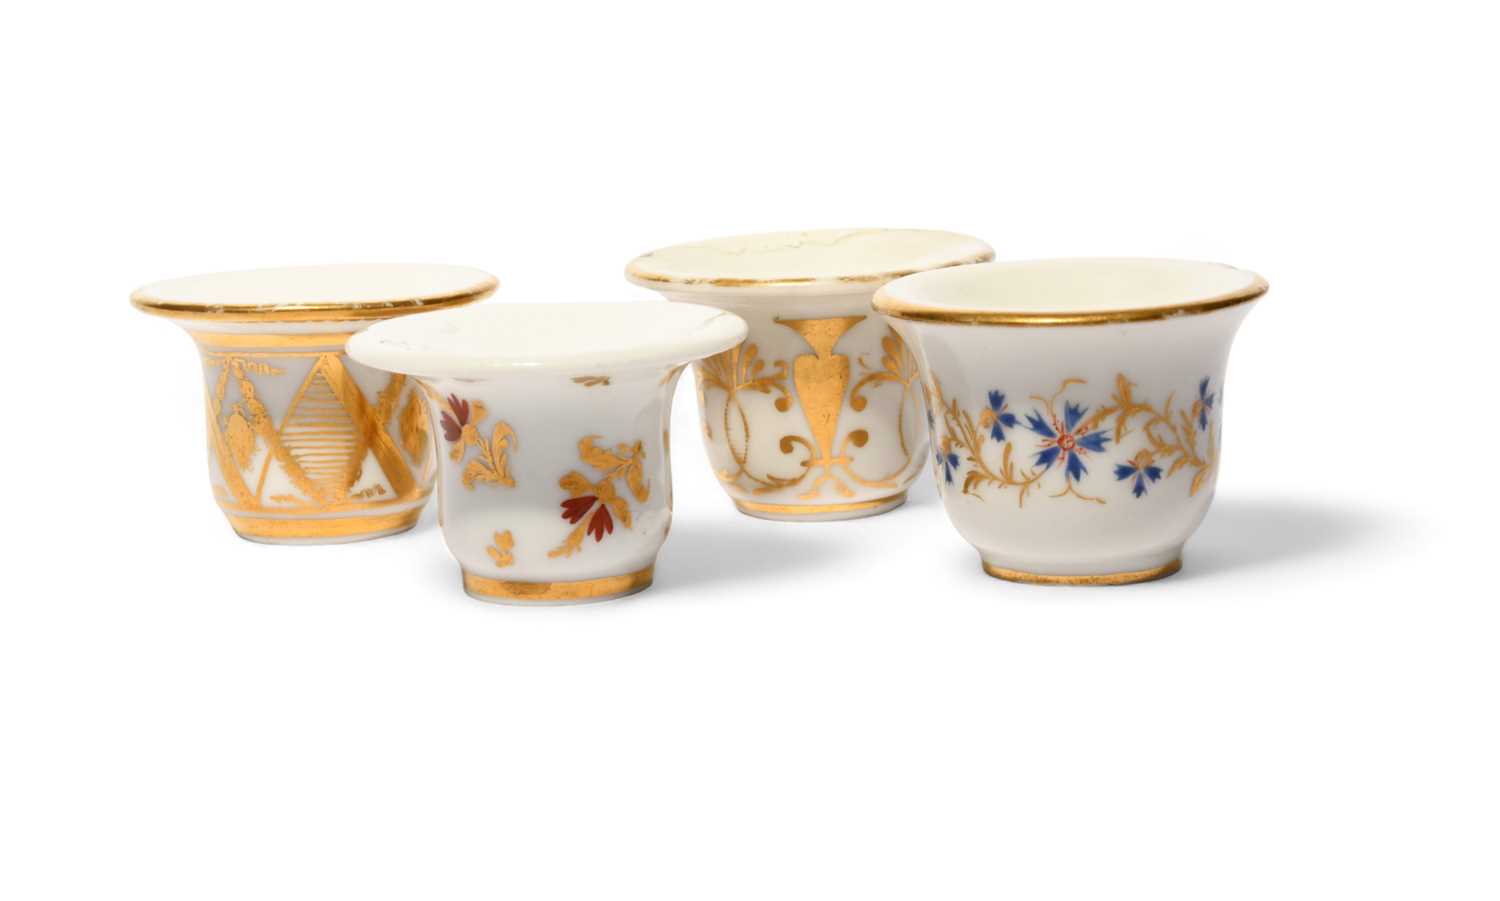 Four Paris porcelain rouge pots, c.1800-20, variously decorated with floral, foliate and geometric